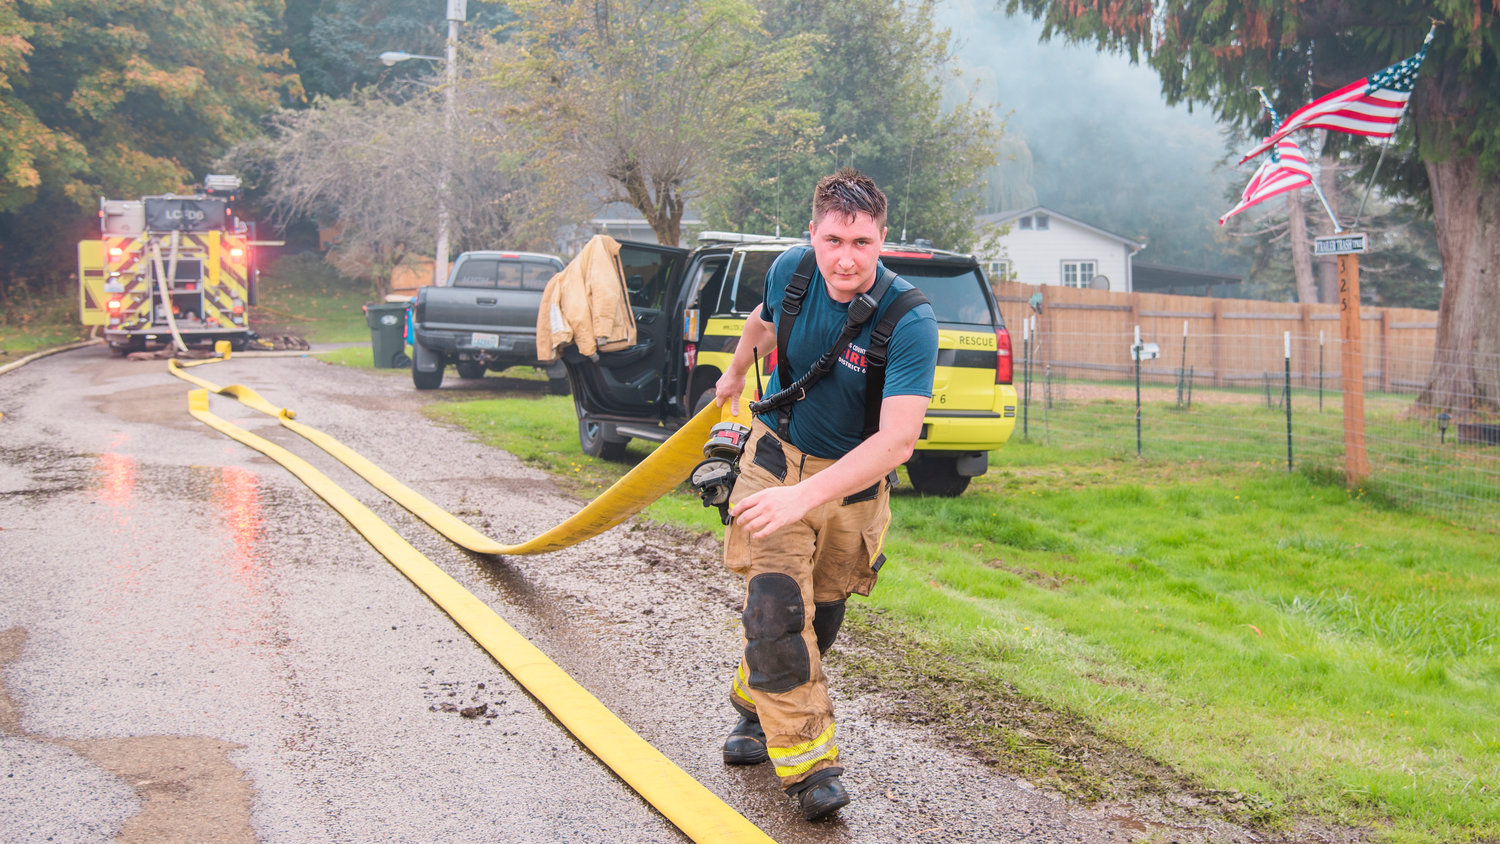 Wyatt “Nutty” Hill, of Lewis County Fire District 6, works to move hose lines following a fire in Pe Ell Thursday afternoon.